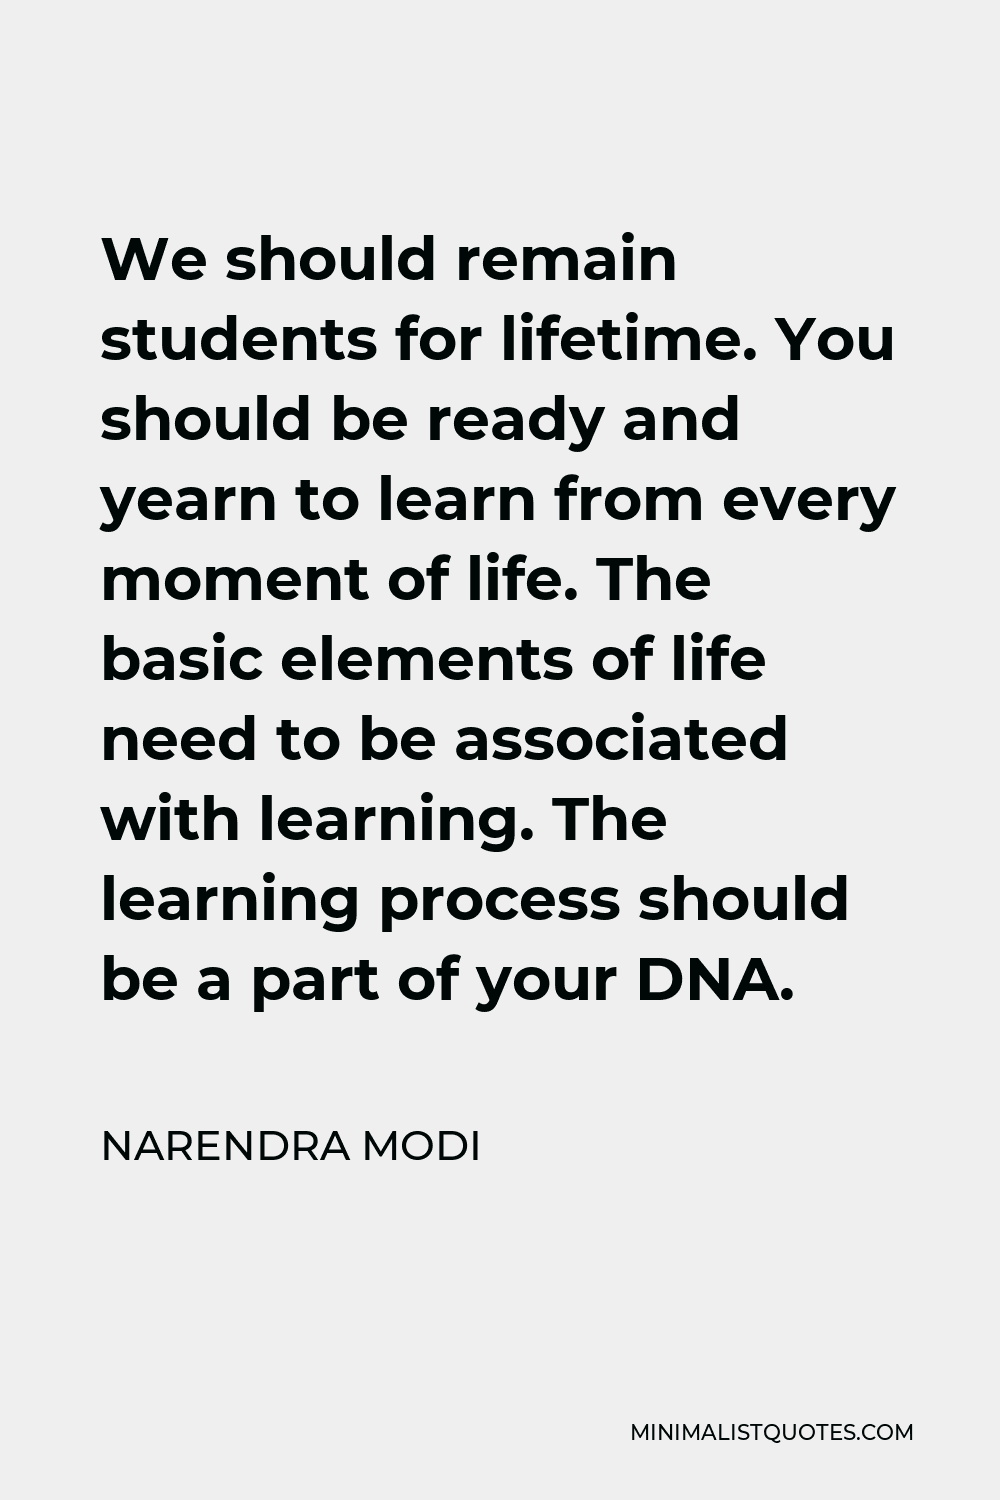 Narendra Modi Quote - We should remain students for lifetime. You should be ready and yearn to learn from every moment of life. The basic elements of life need to be associated with learning. The learning process should be a part of your DNA.